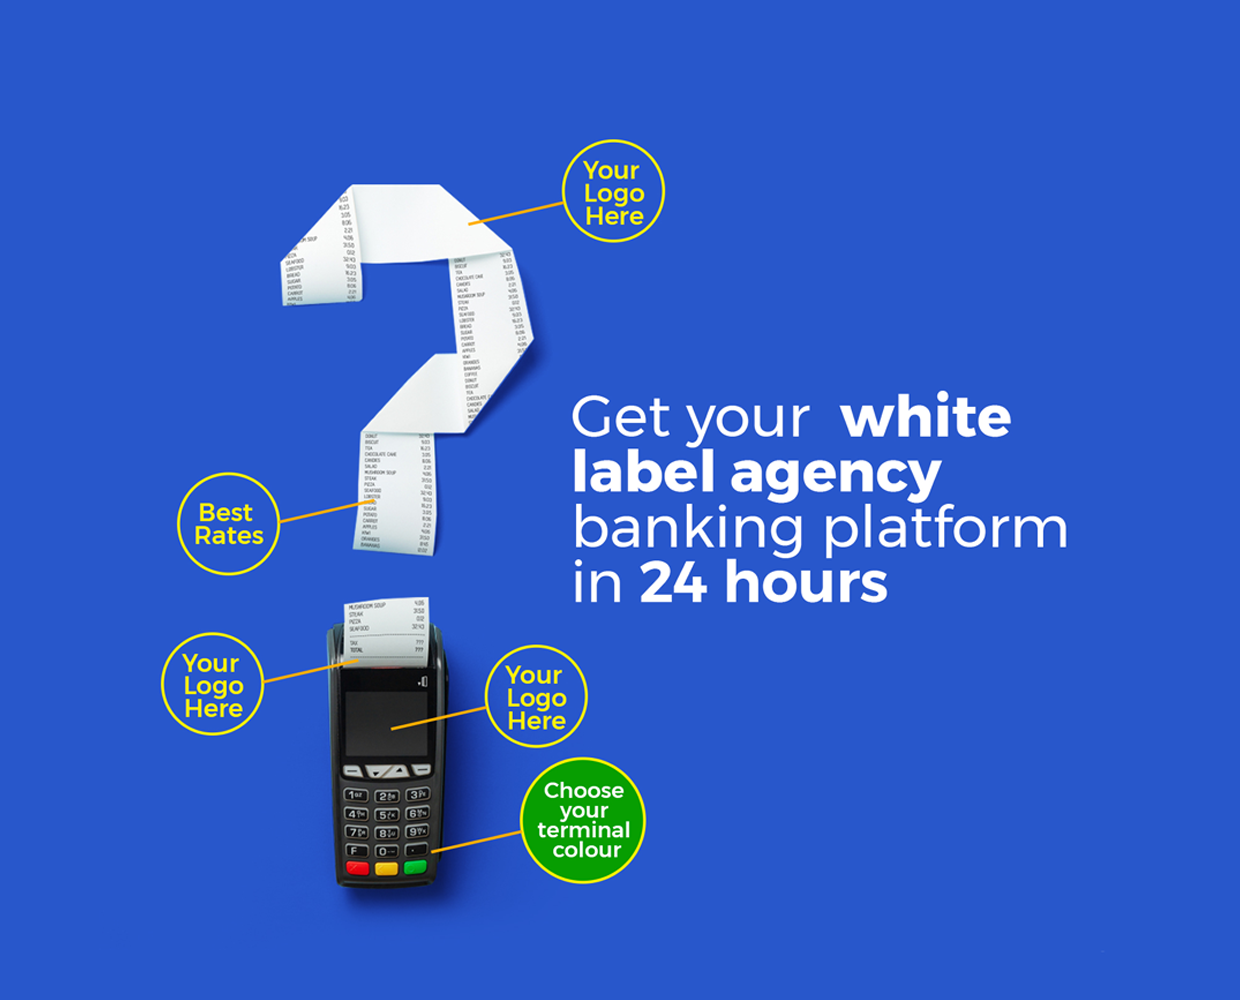 Get your white label agency banking platform in 24hours by Partnering with Agency Banking Networks in Nigeria